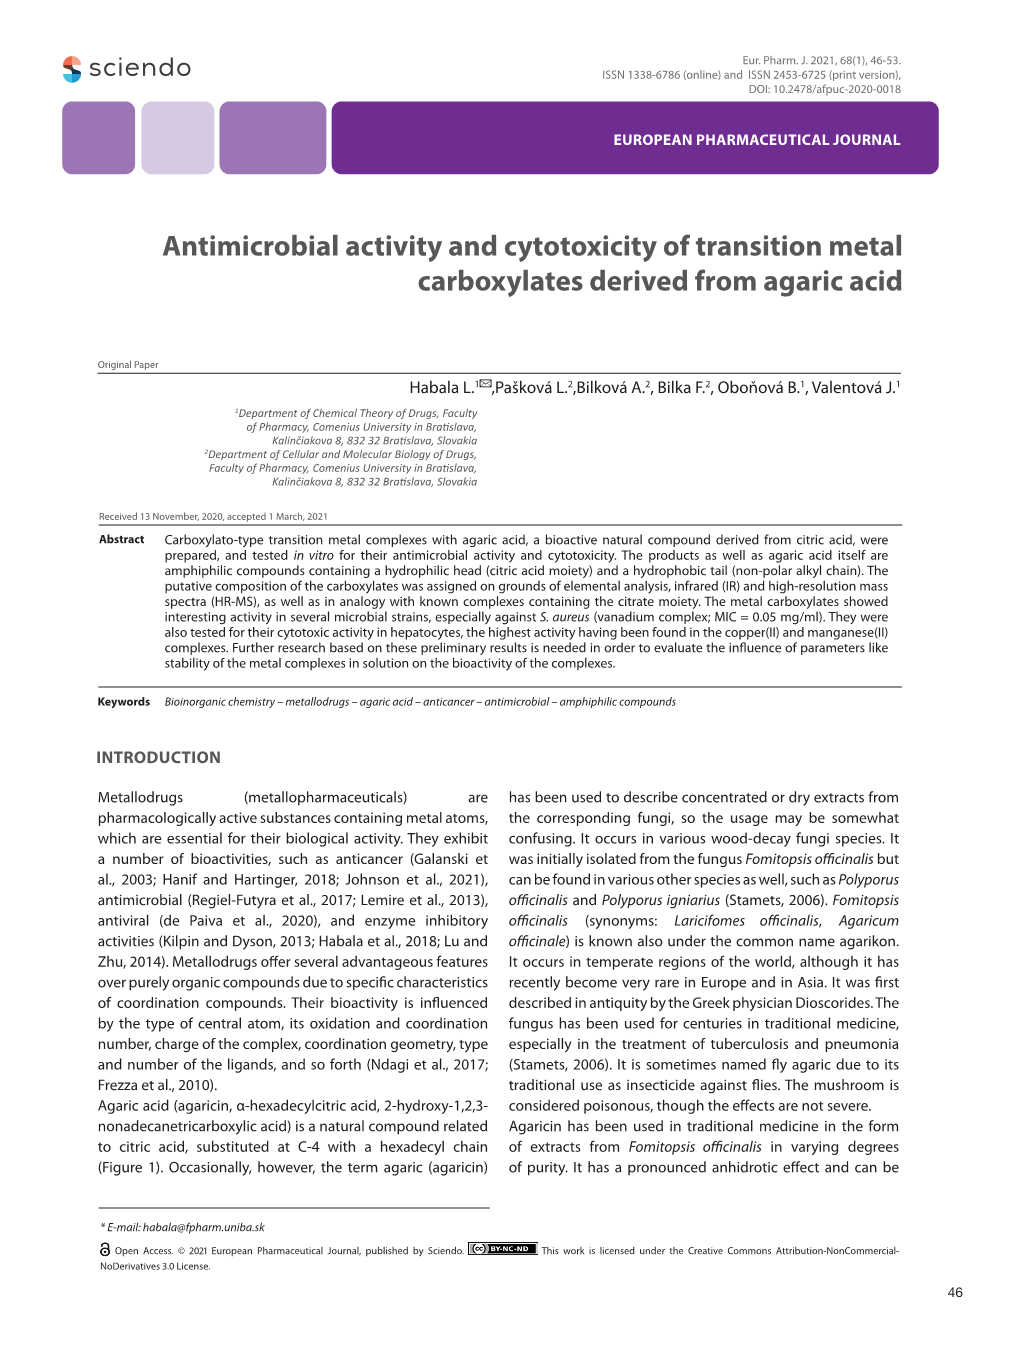 Antimicrobial Activity and Cytotoxicity of Transition Metal Carboxylates Derived from Agaric Acid